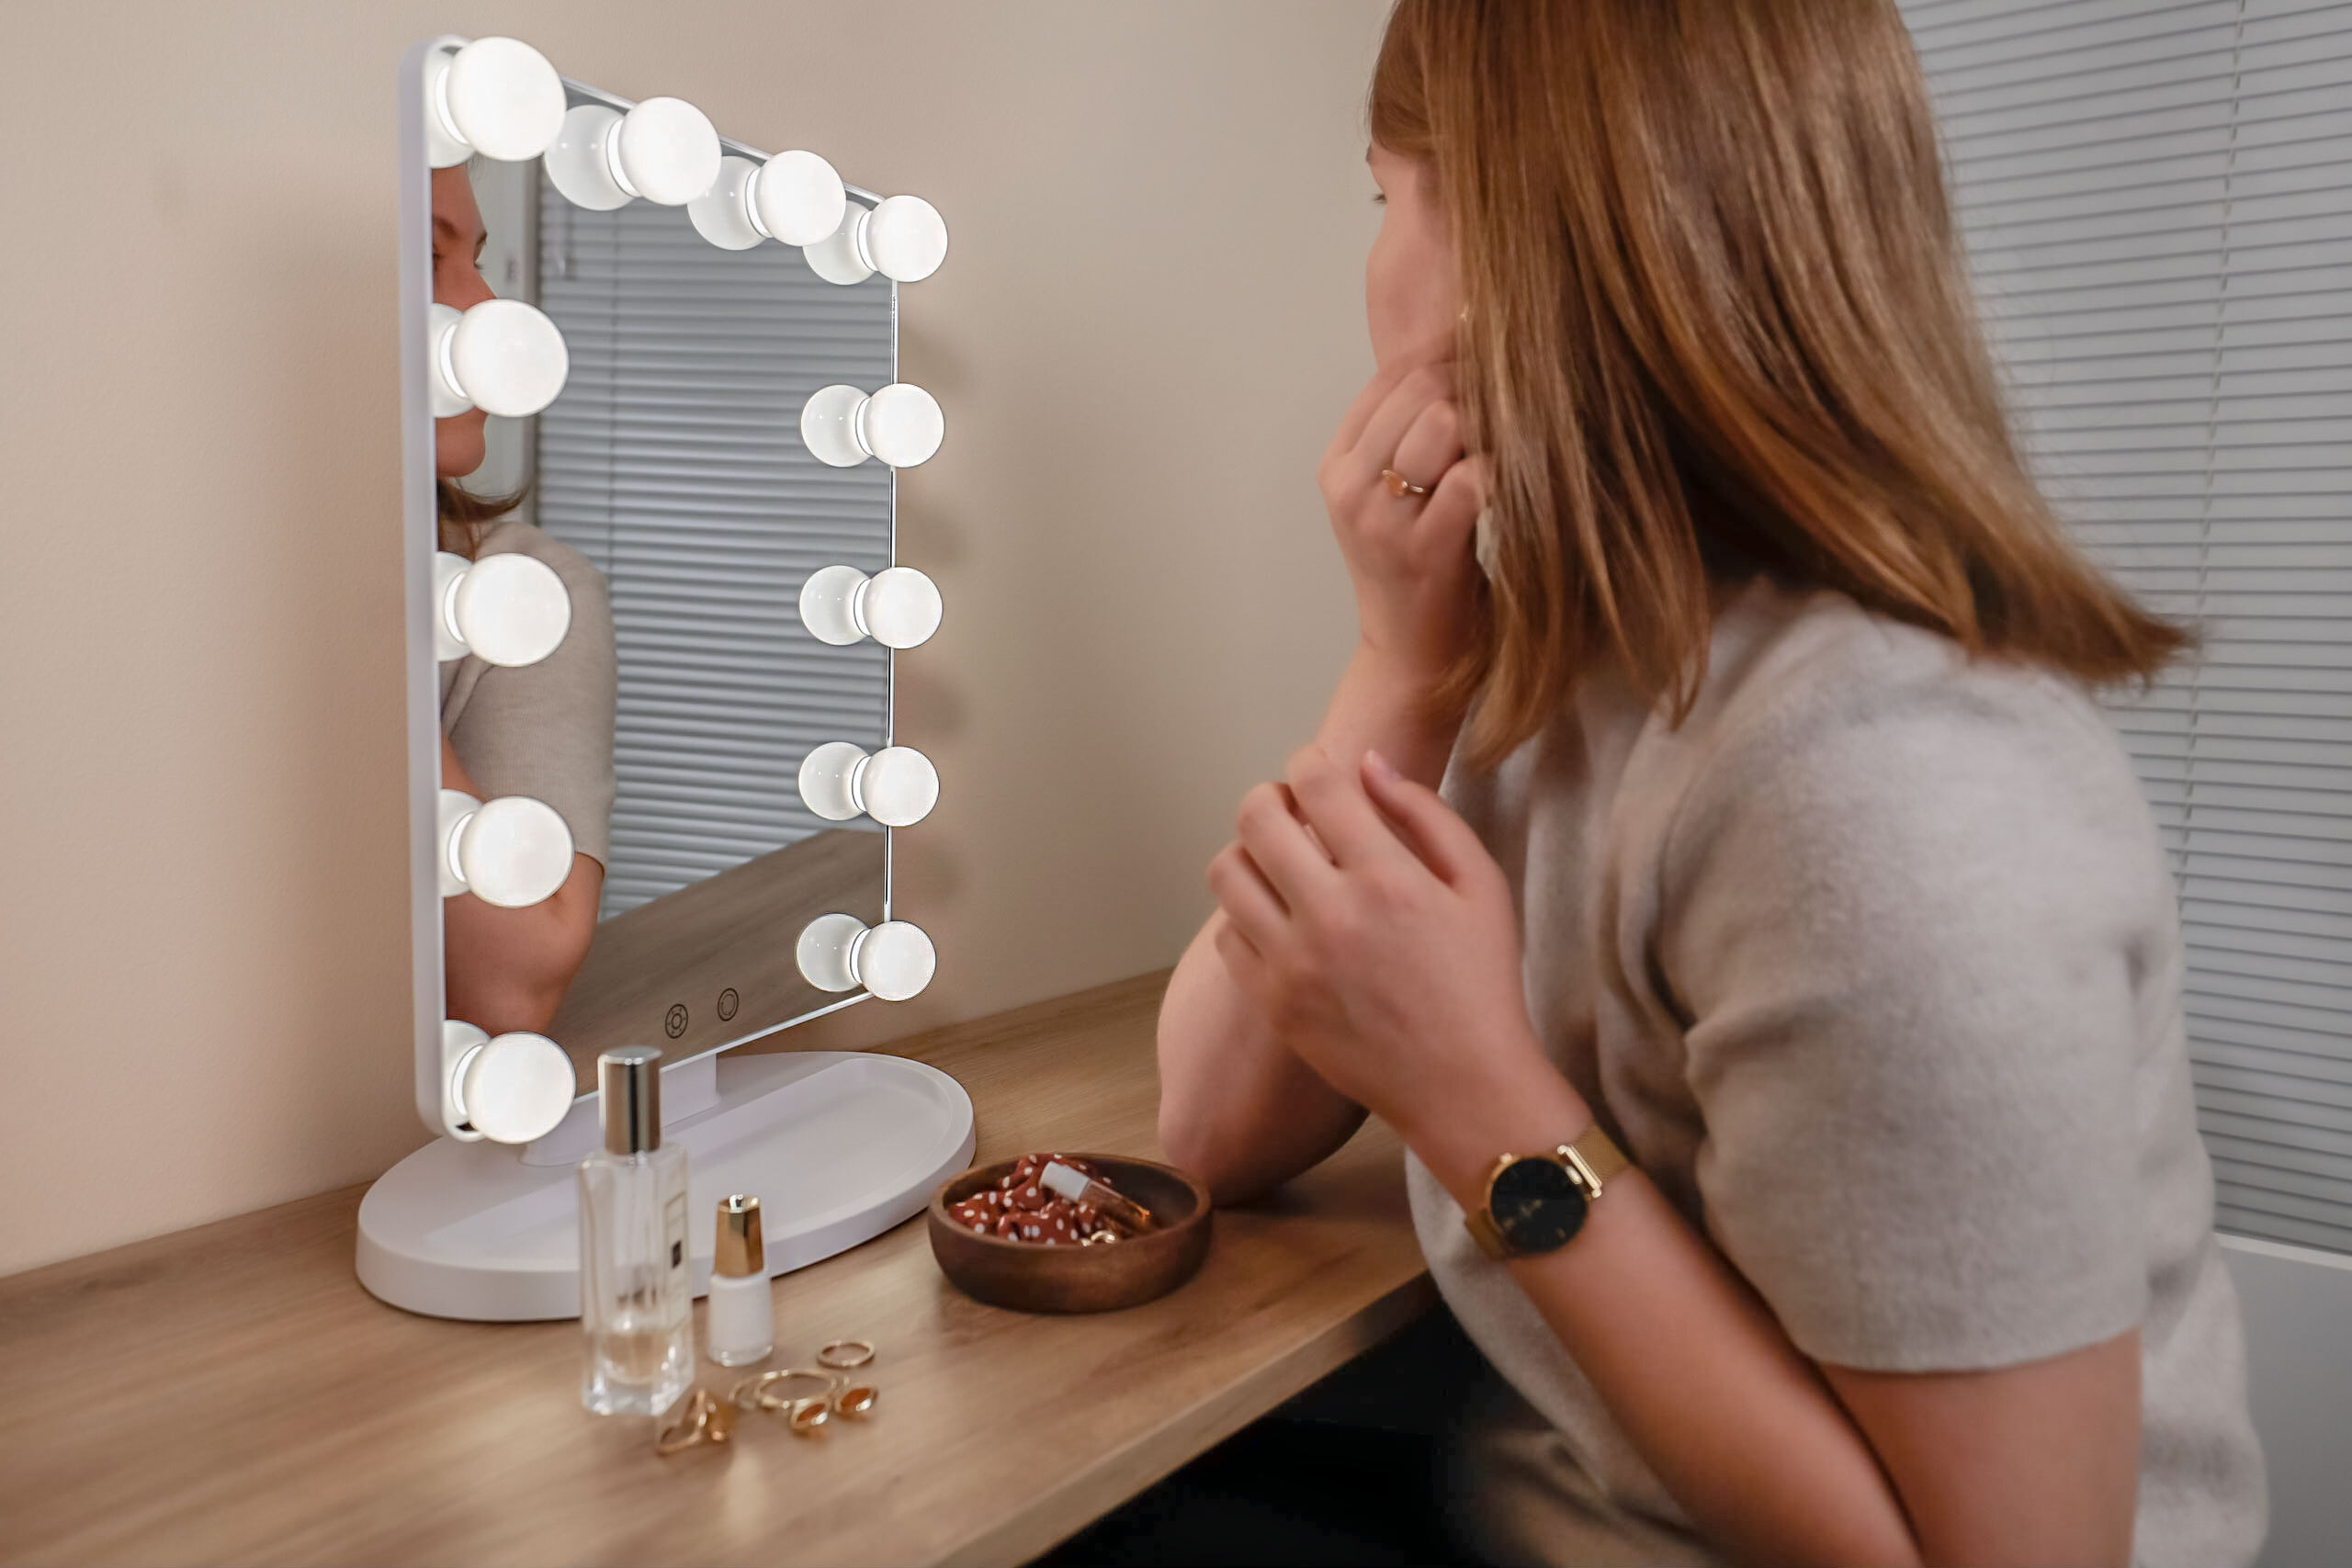 Woman attaching earrings in front of the makeup mirror